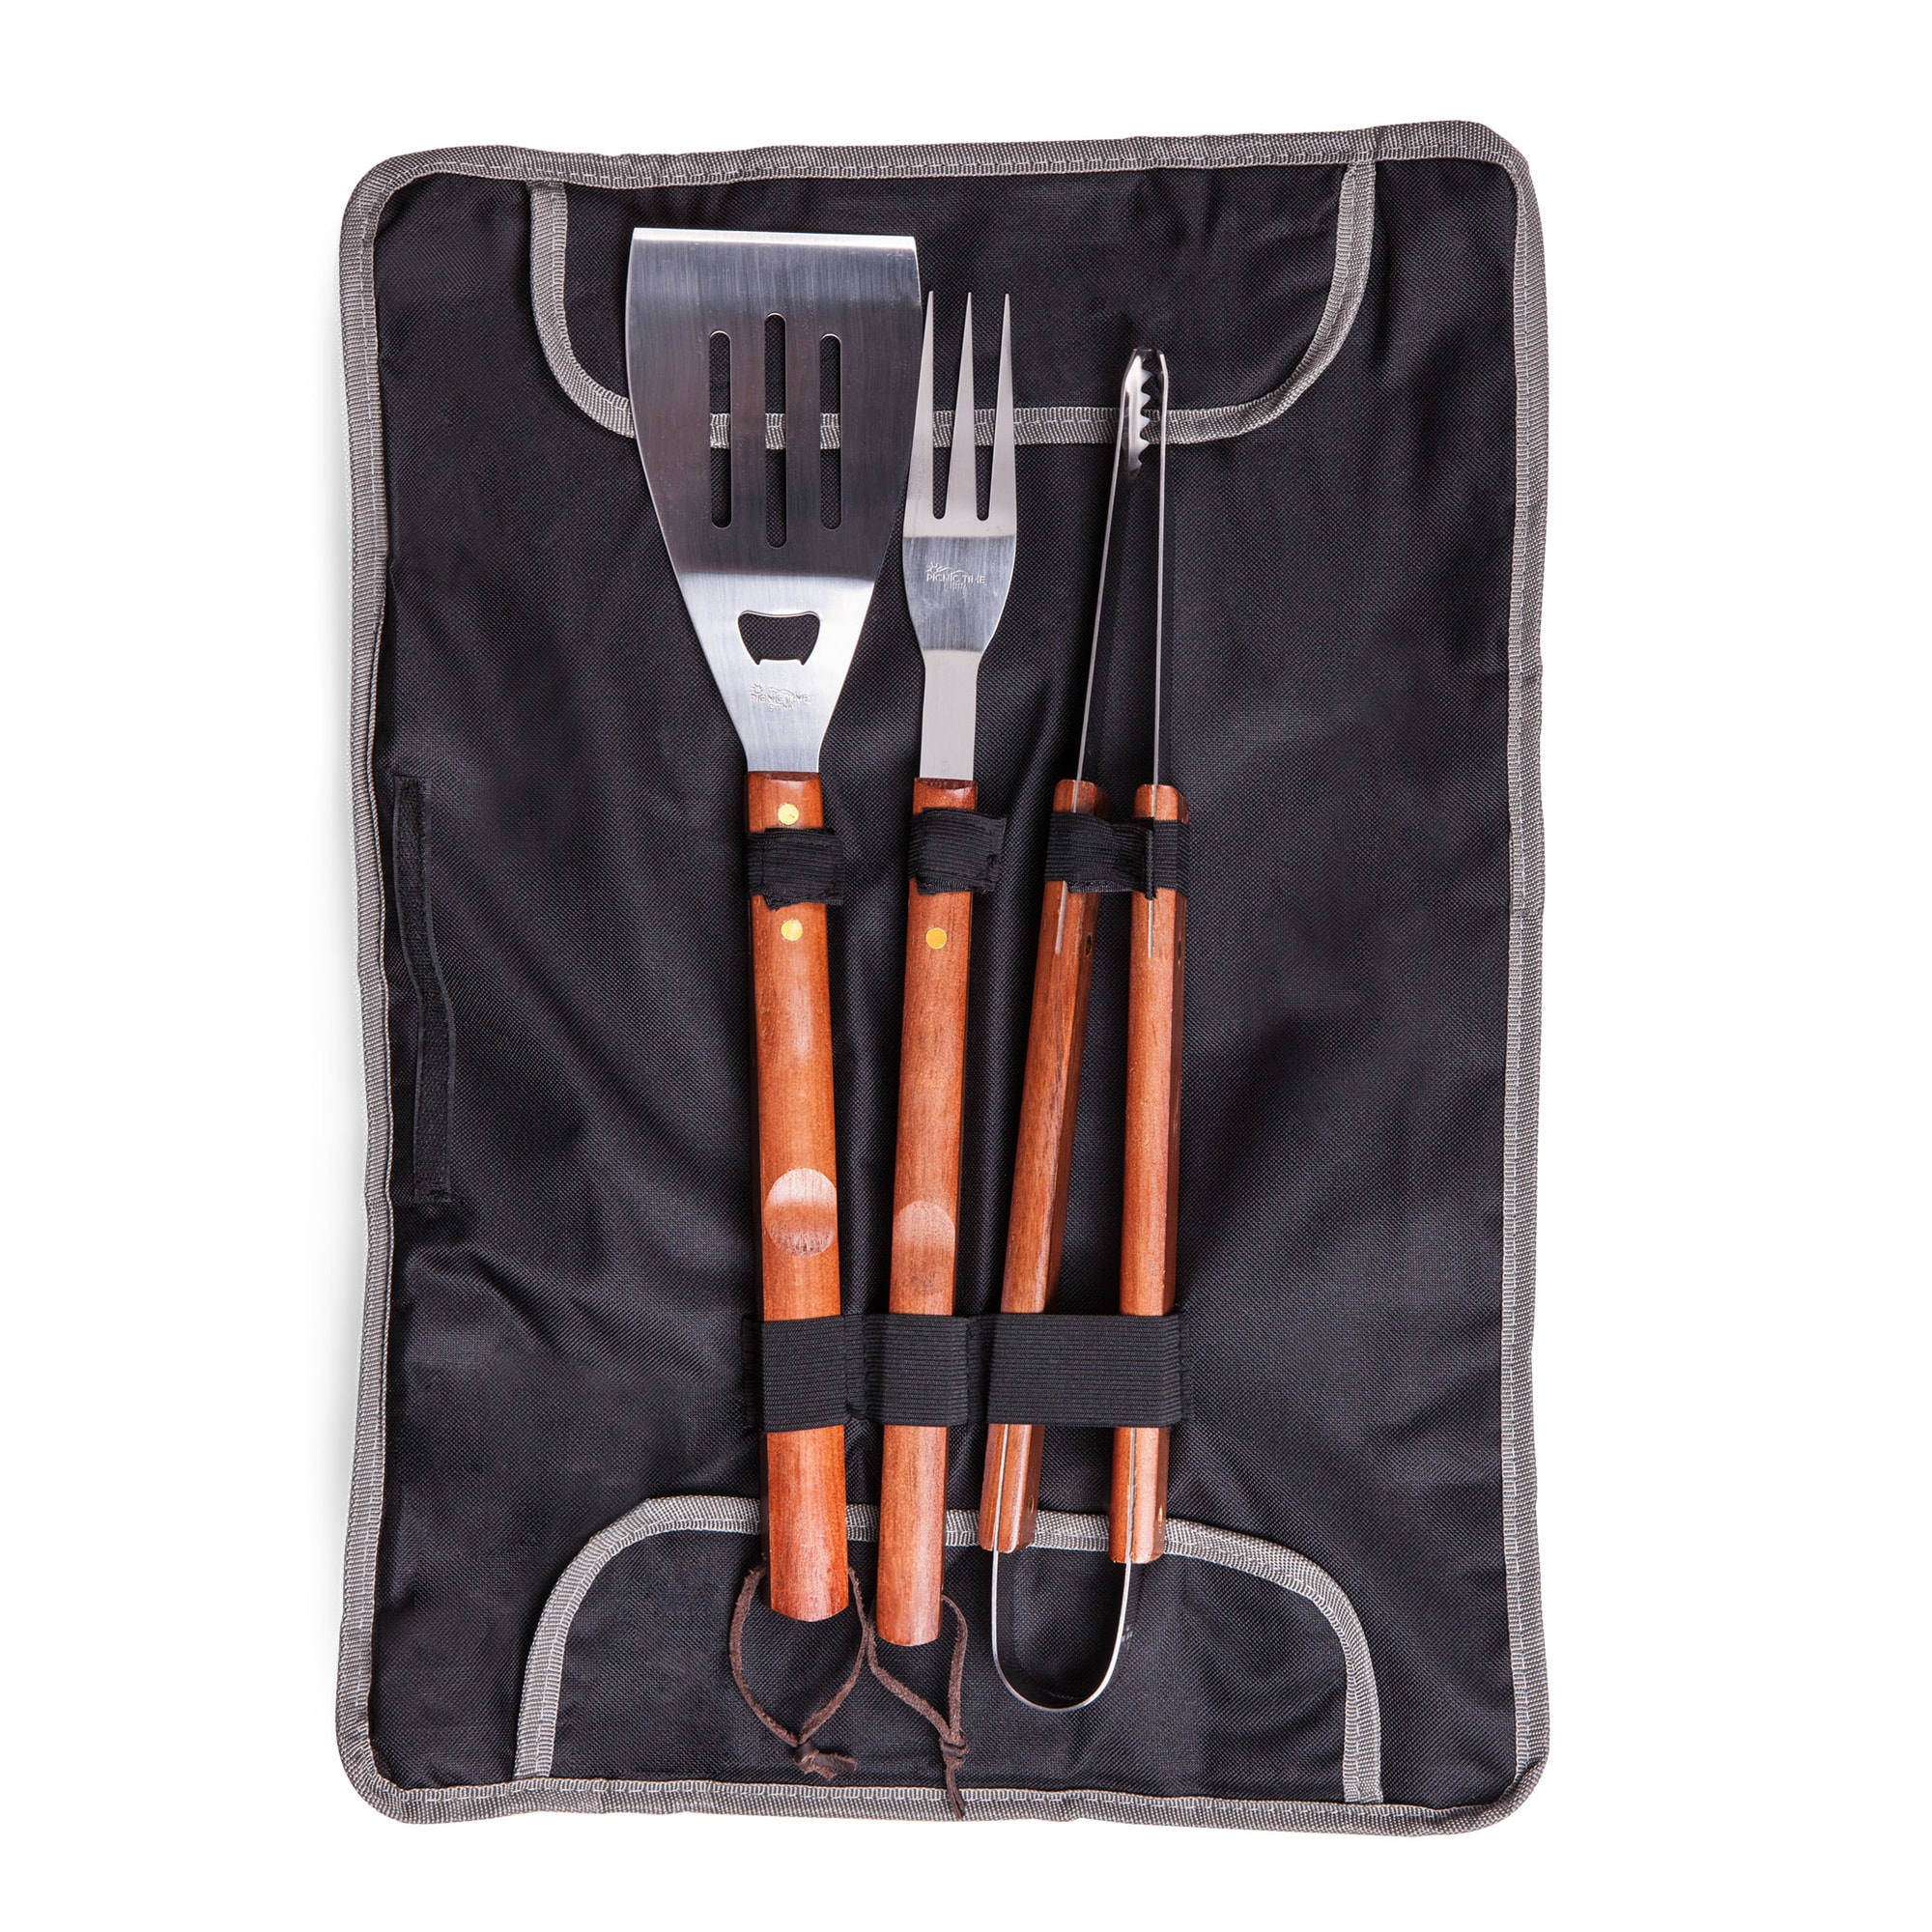 Boise State Broncos 3-Piece BBQ Tote & Grill Set - image 2 of 2